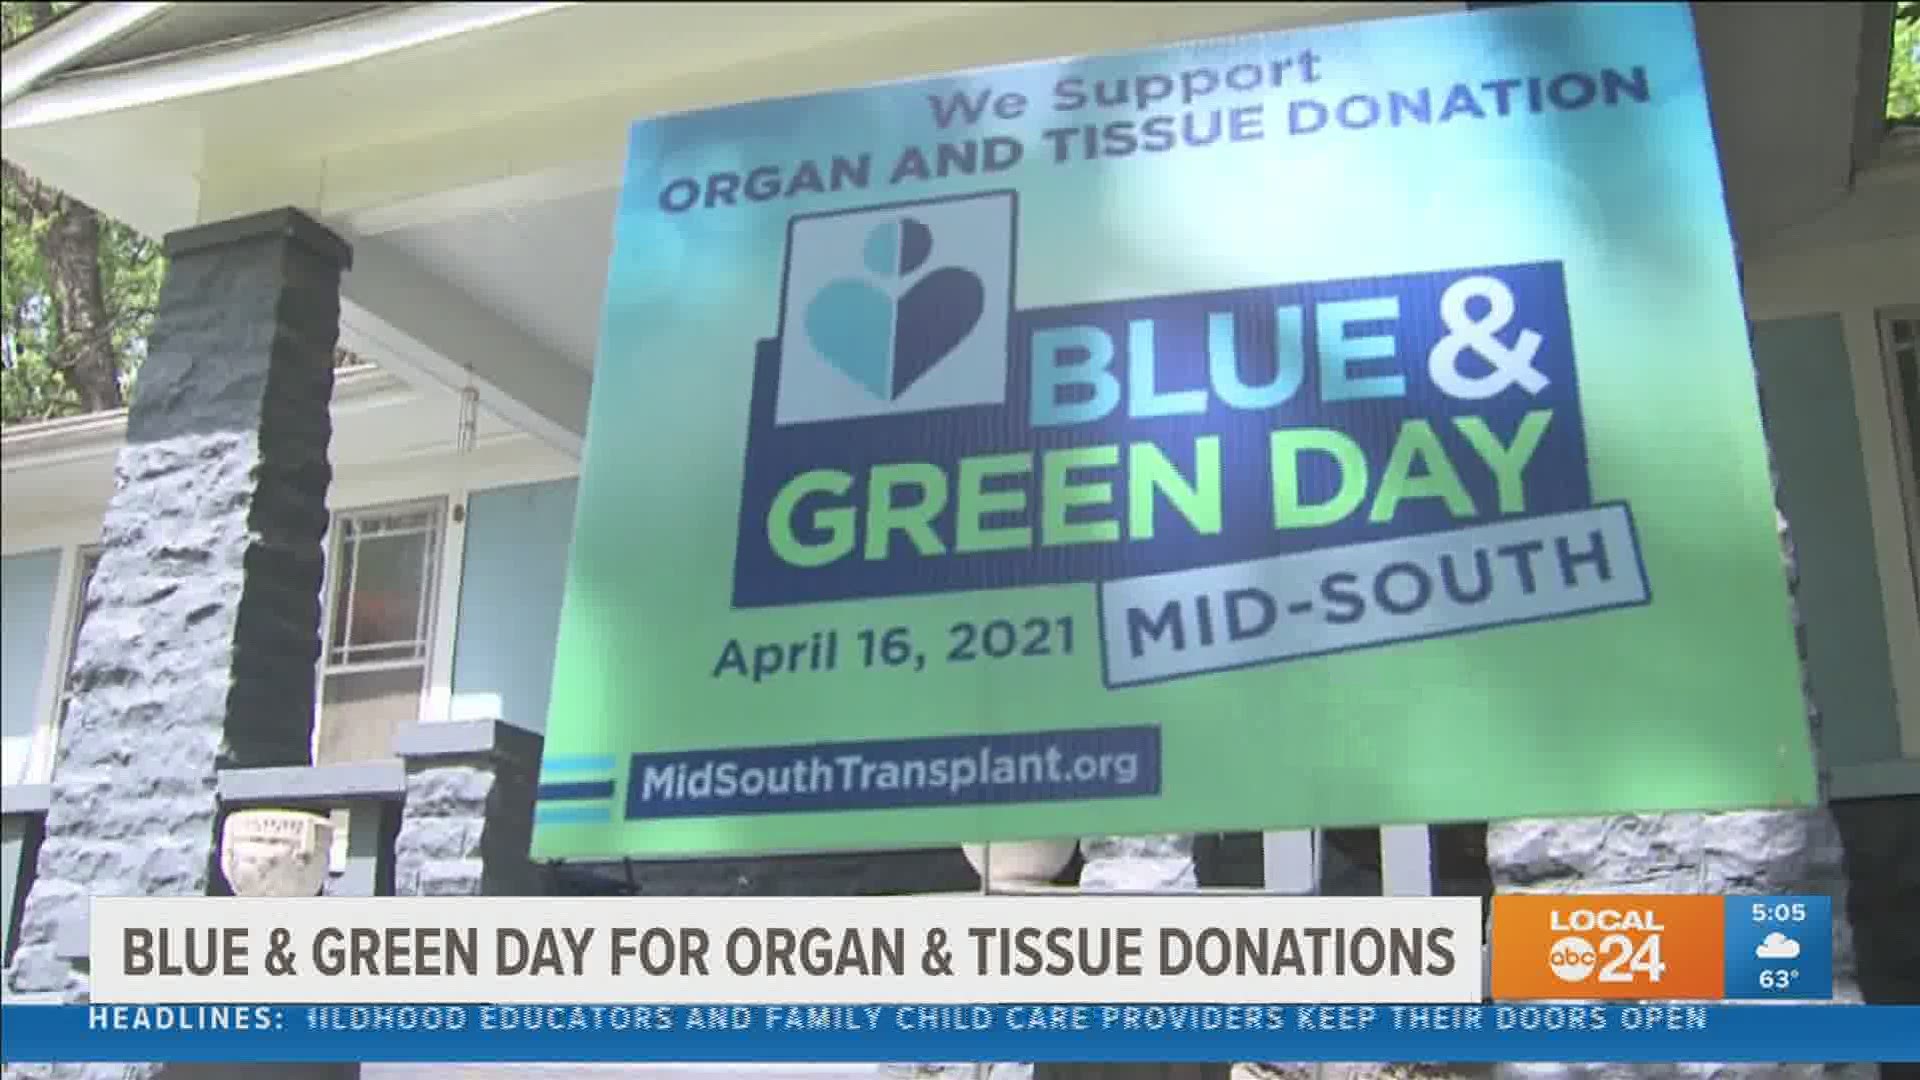 The Mid-South Transplant Foundation says many Mid-South landmarks & businesses will shine blue & green lights April 16th.